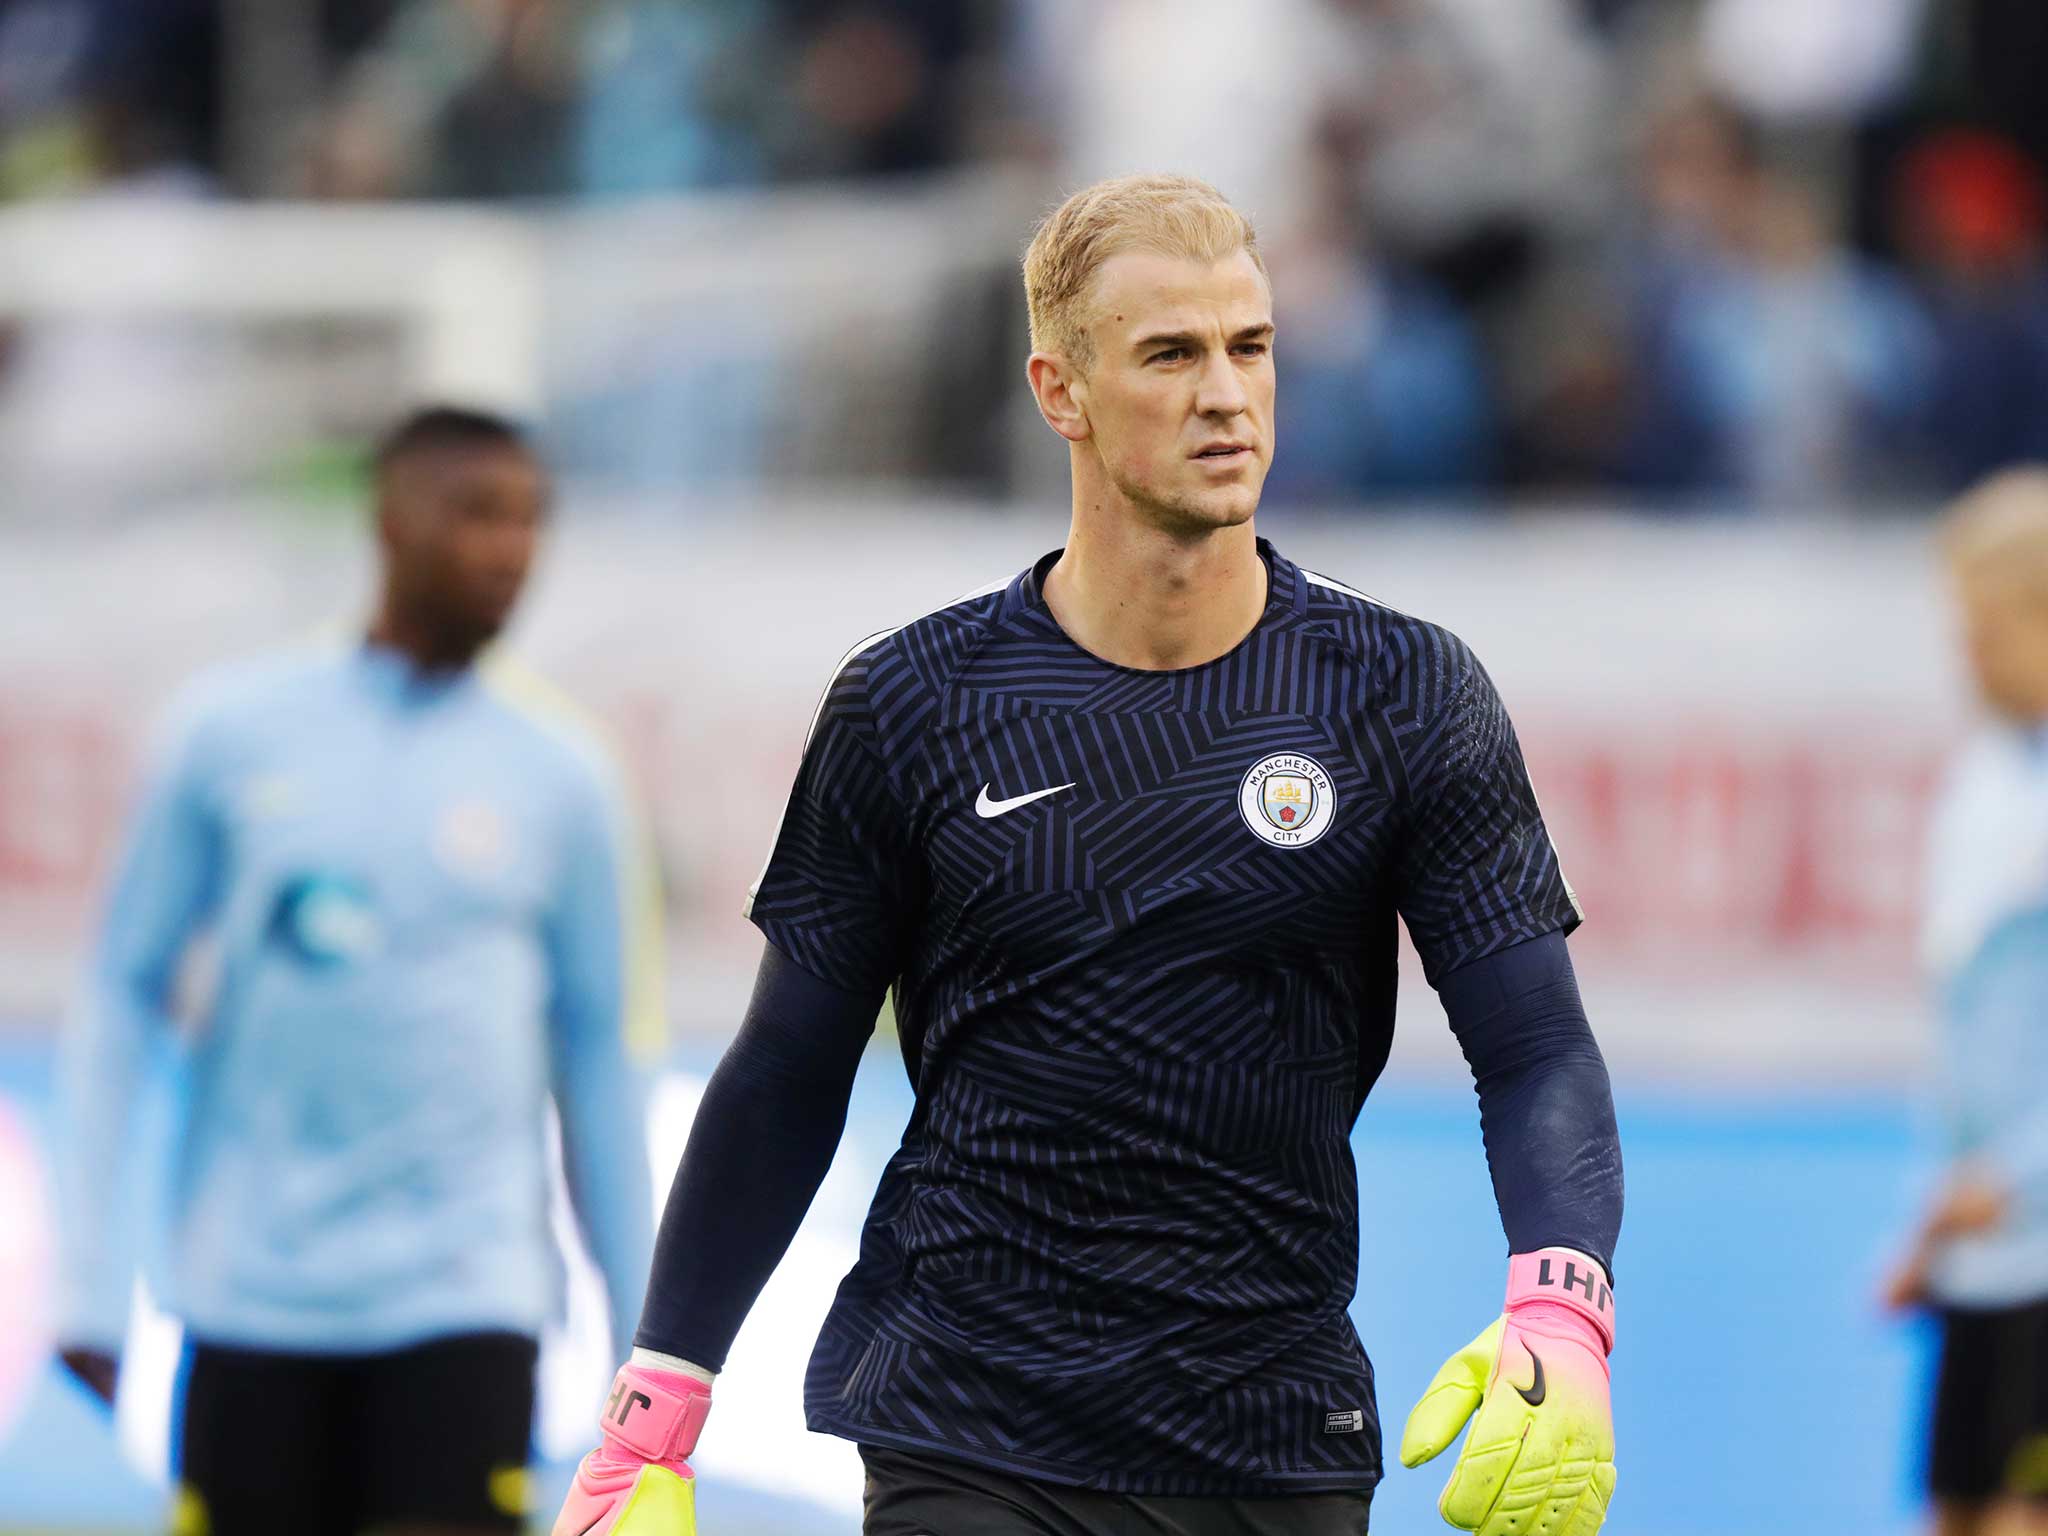 Joe Hart may face a struggle to stay in the Manchester City side this season